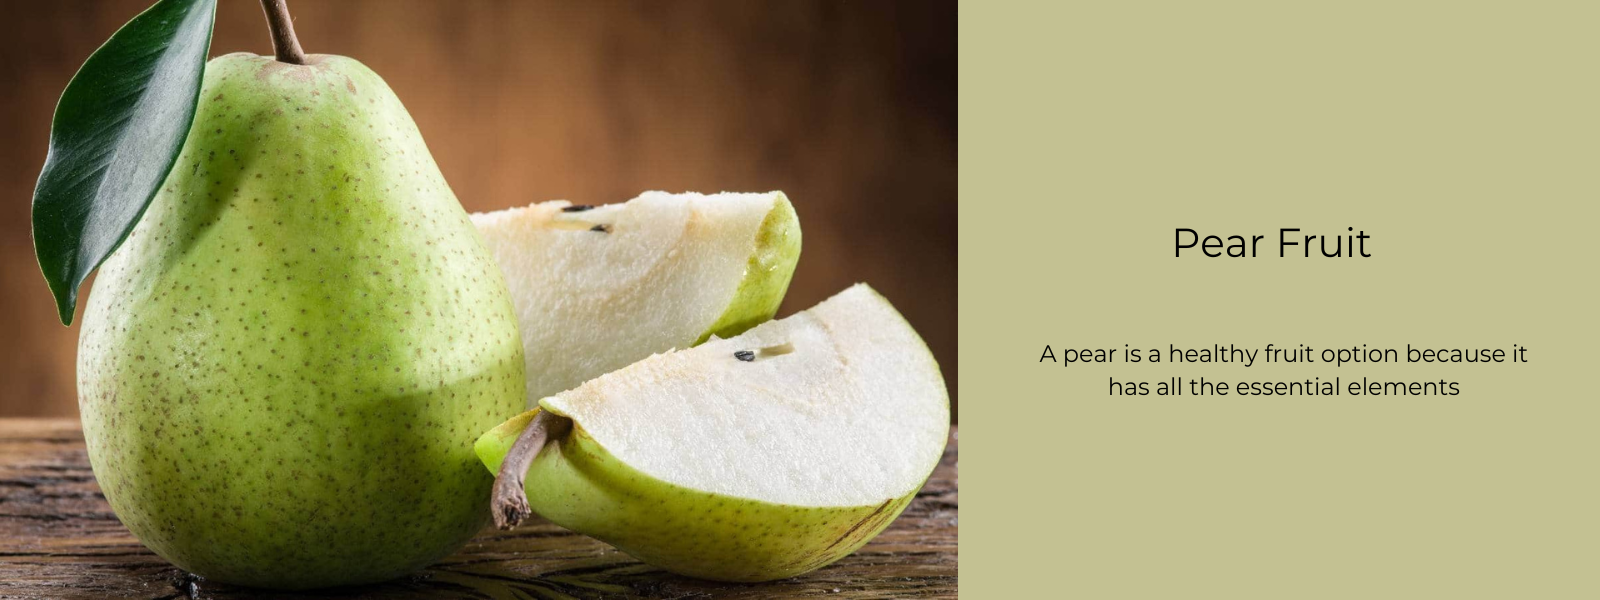 Pear Fruit- Health Benefits, Uses and Important Facts